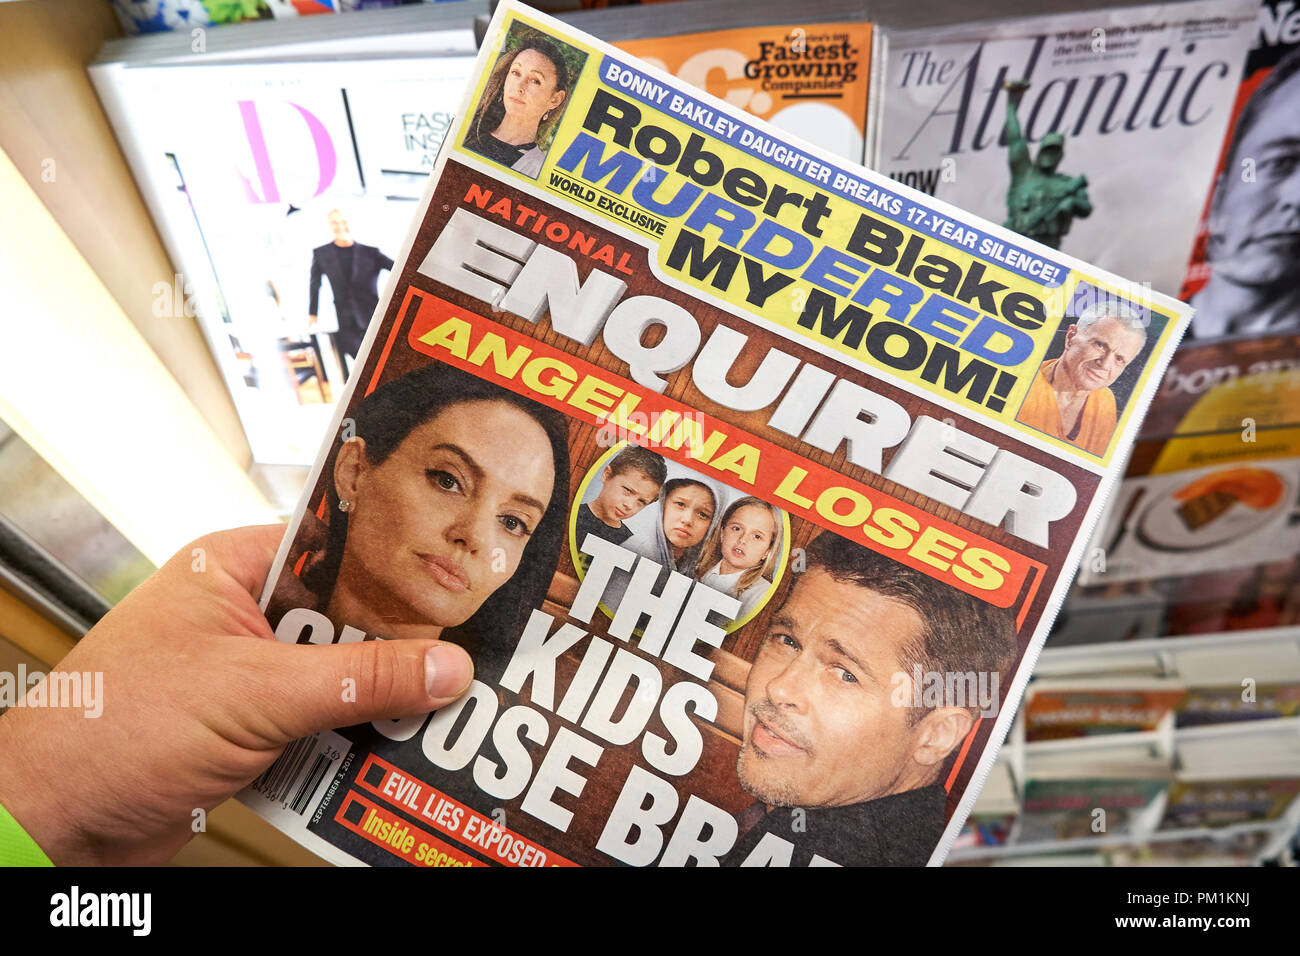 MIAMI, USA - AUGUST 22, 2018: The National Enquirer newspaper in a hand. The National Enquirer is a popular American supermarket tabloid published by  Stock Photo